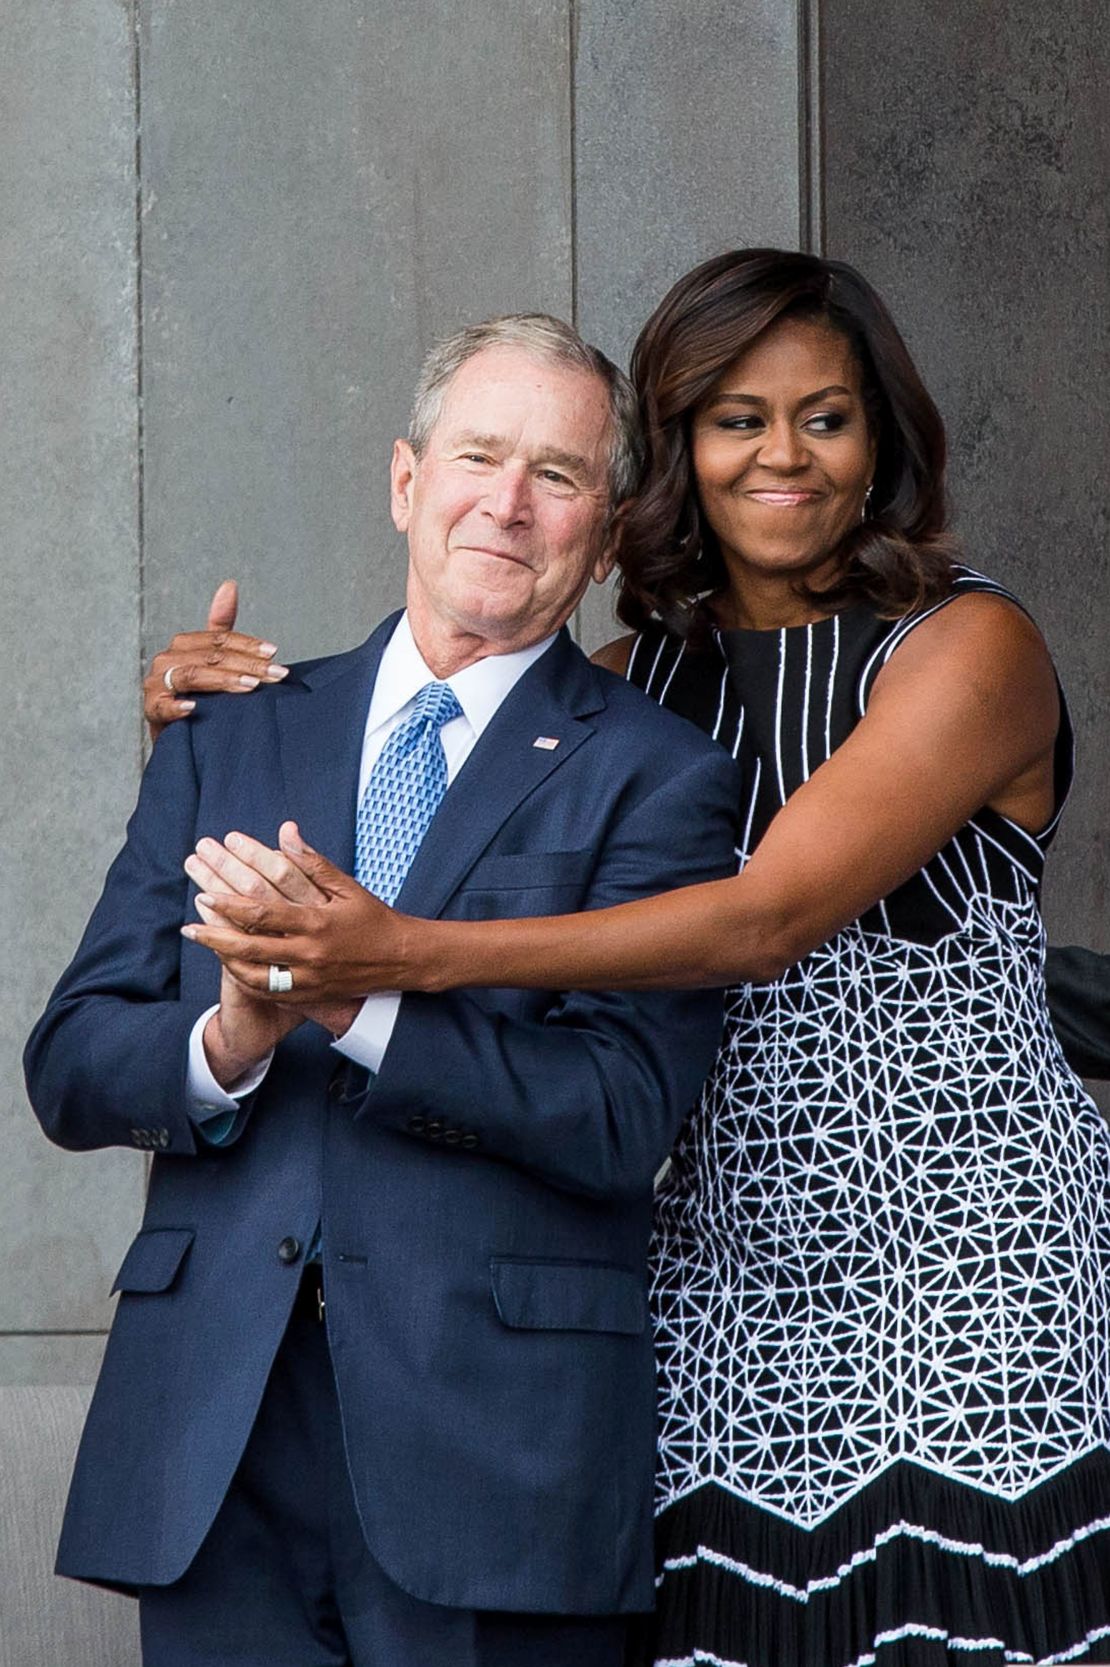 Former US President George W. Bush receives a hug from US First Lady Michelle Obama on September 24, 2016 in Washington, D.C.  